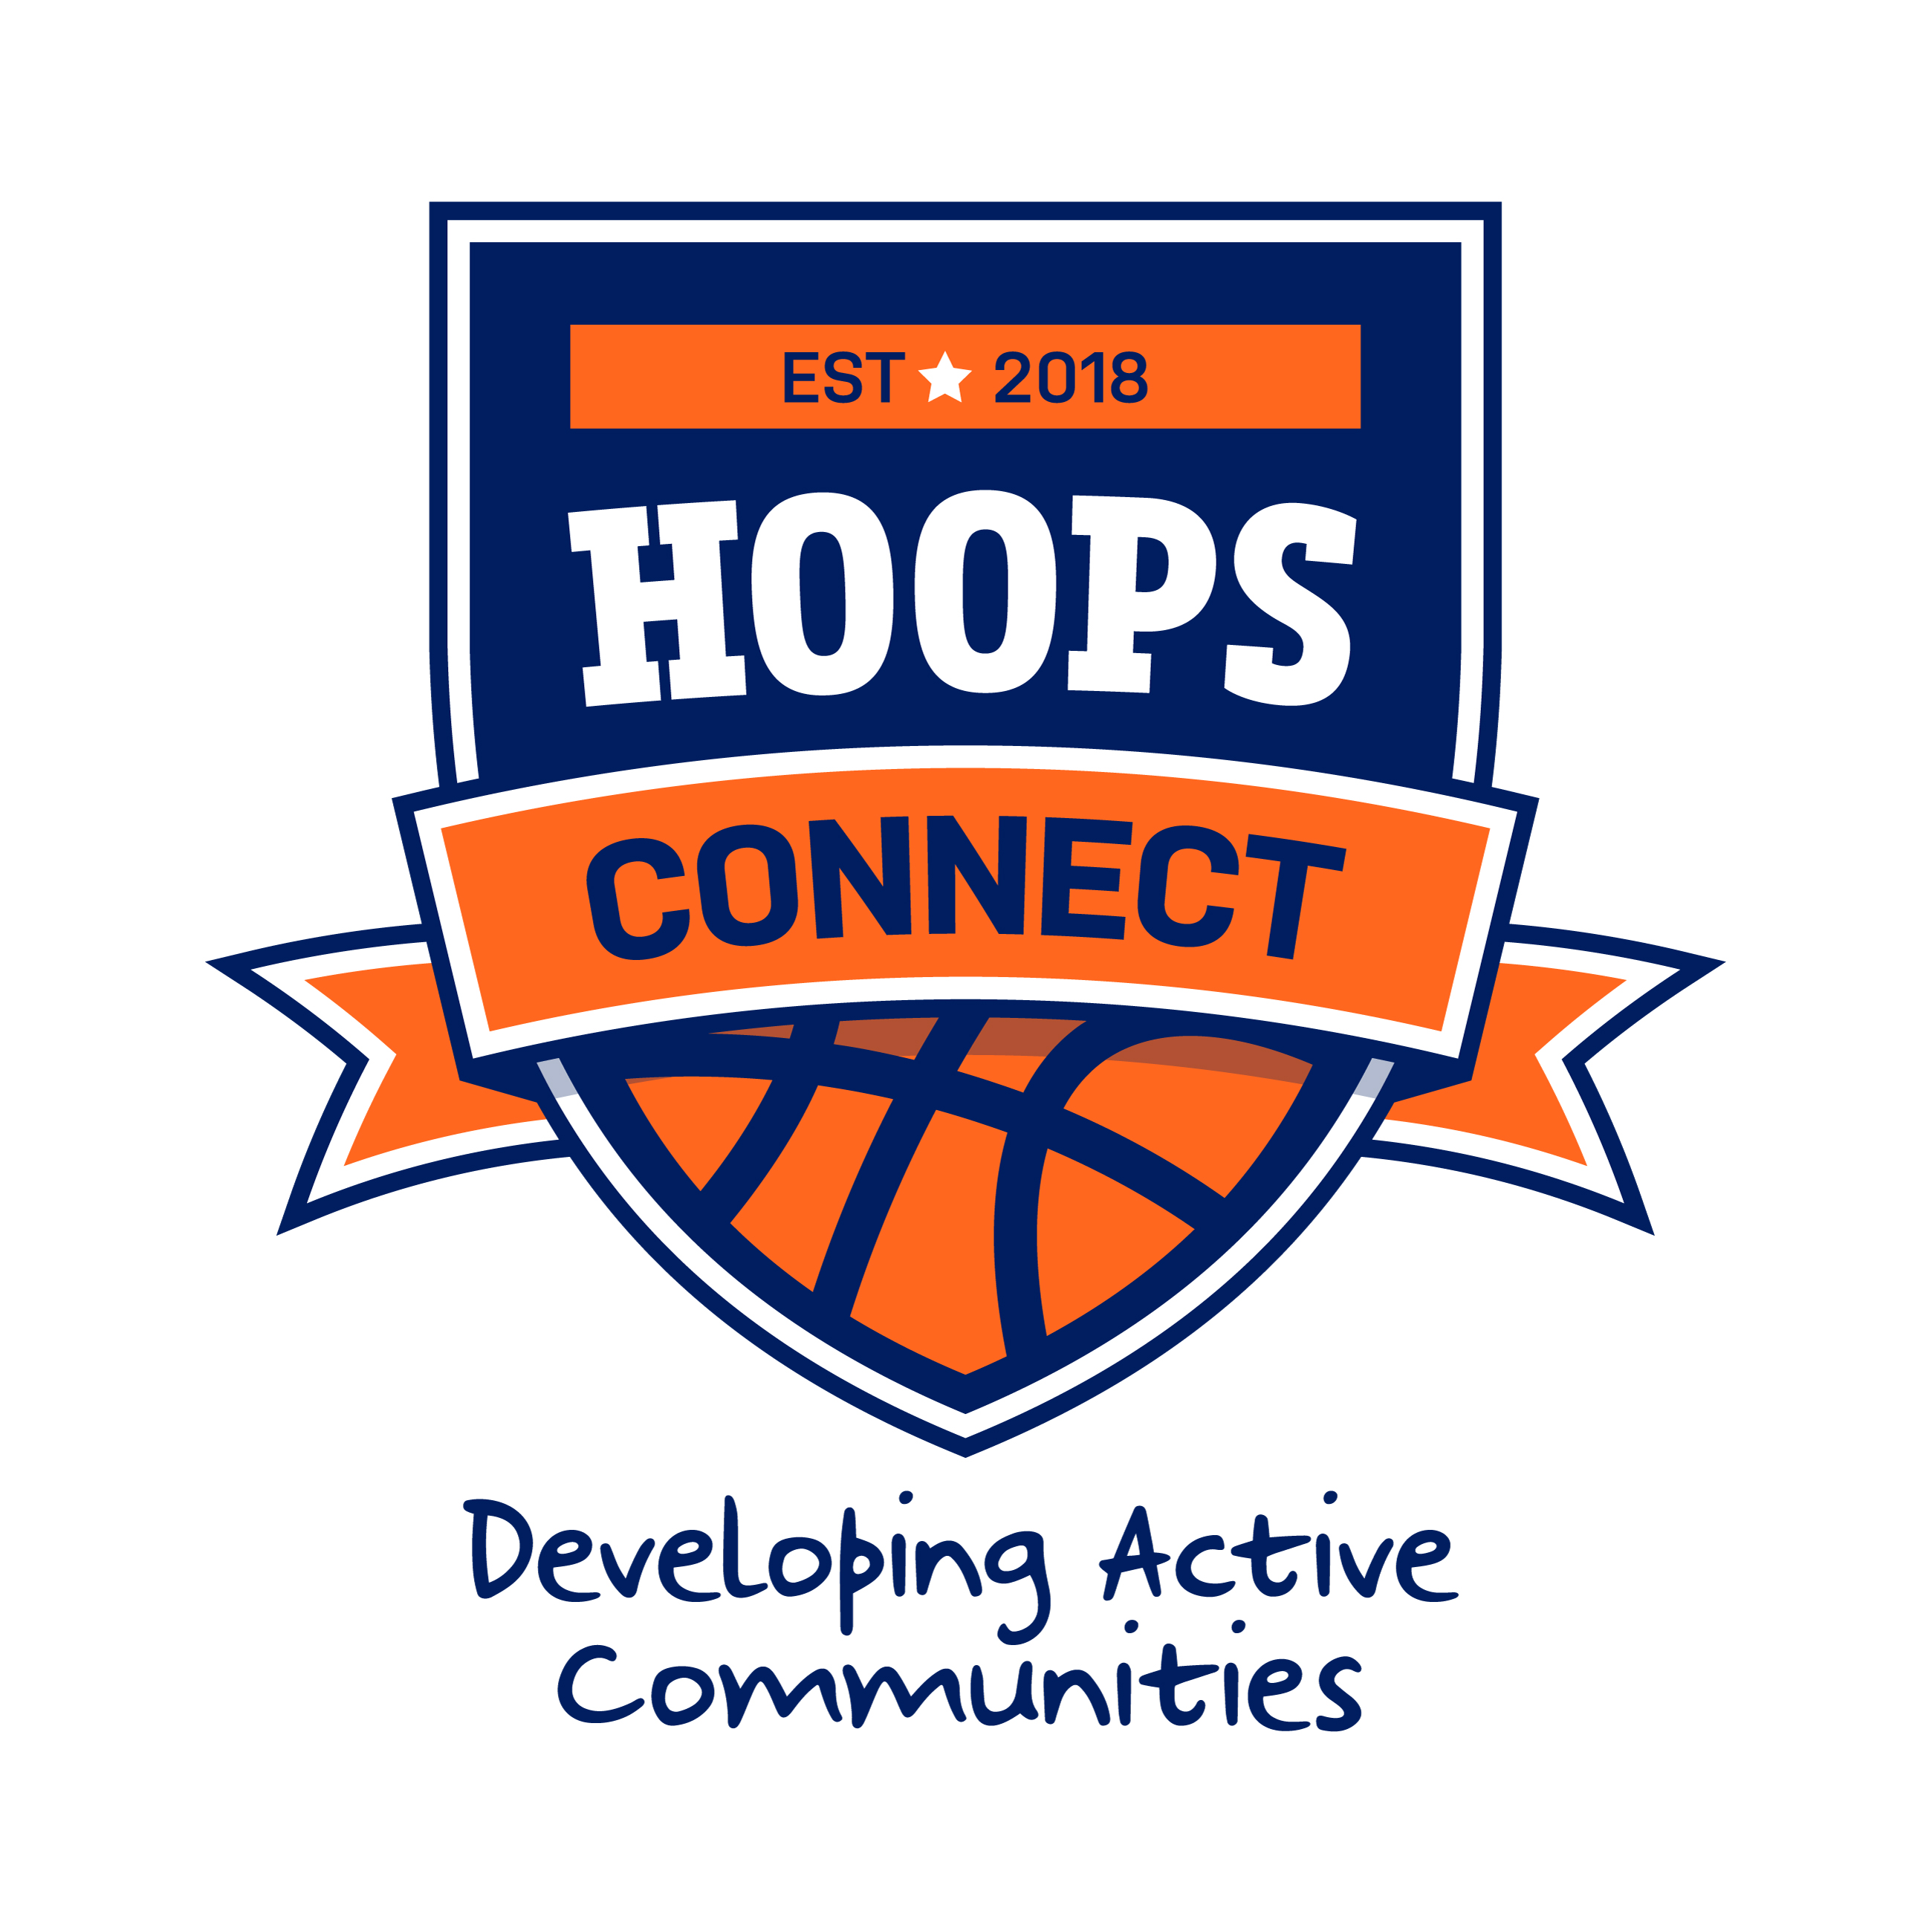 Council hoops connect logo